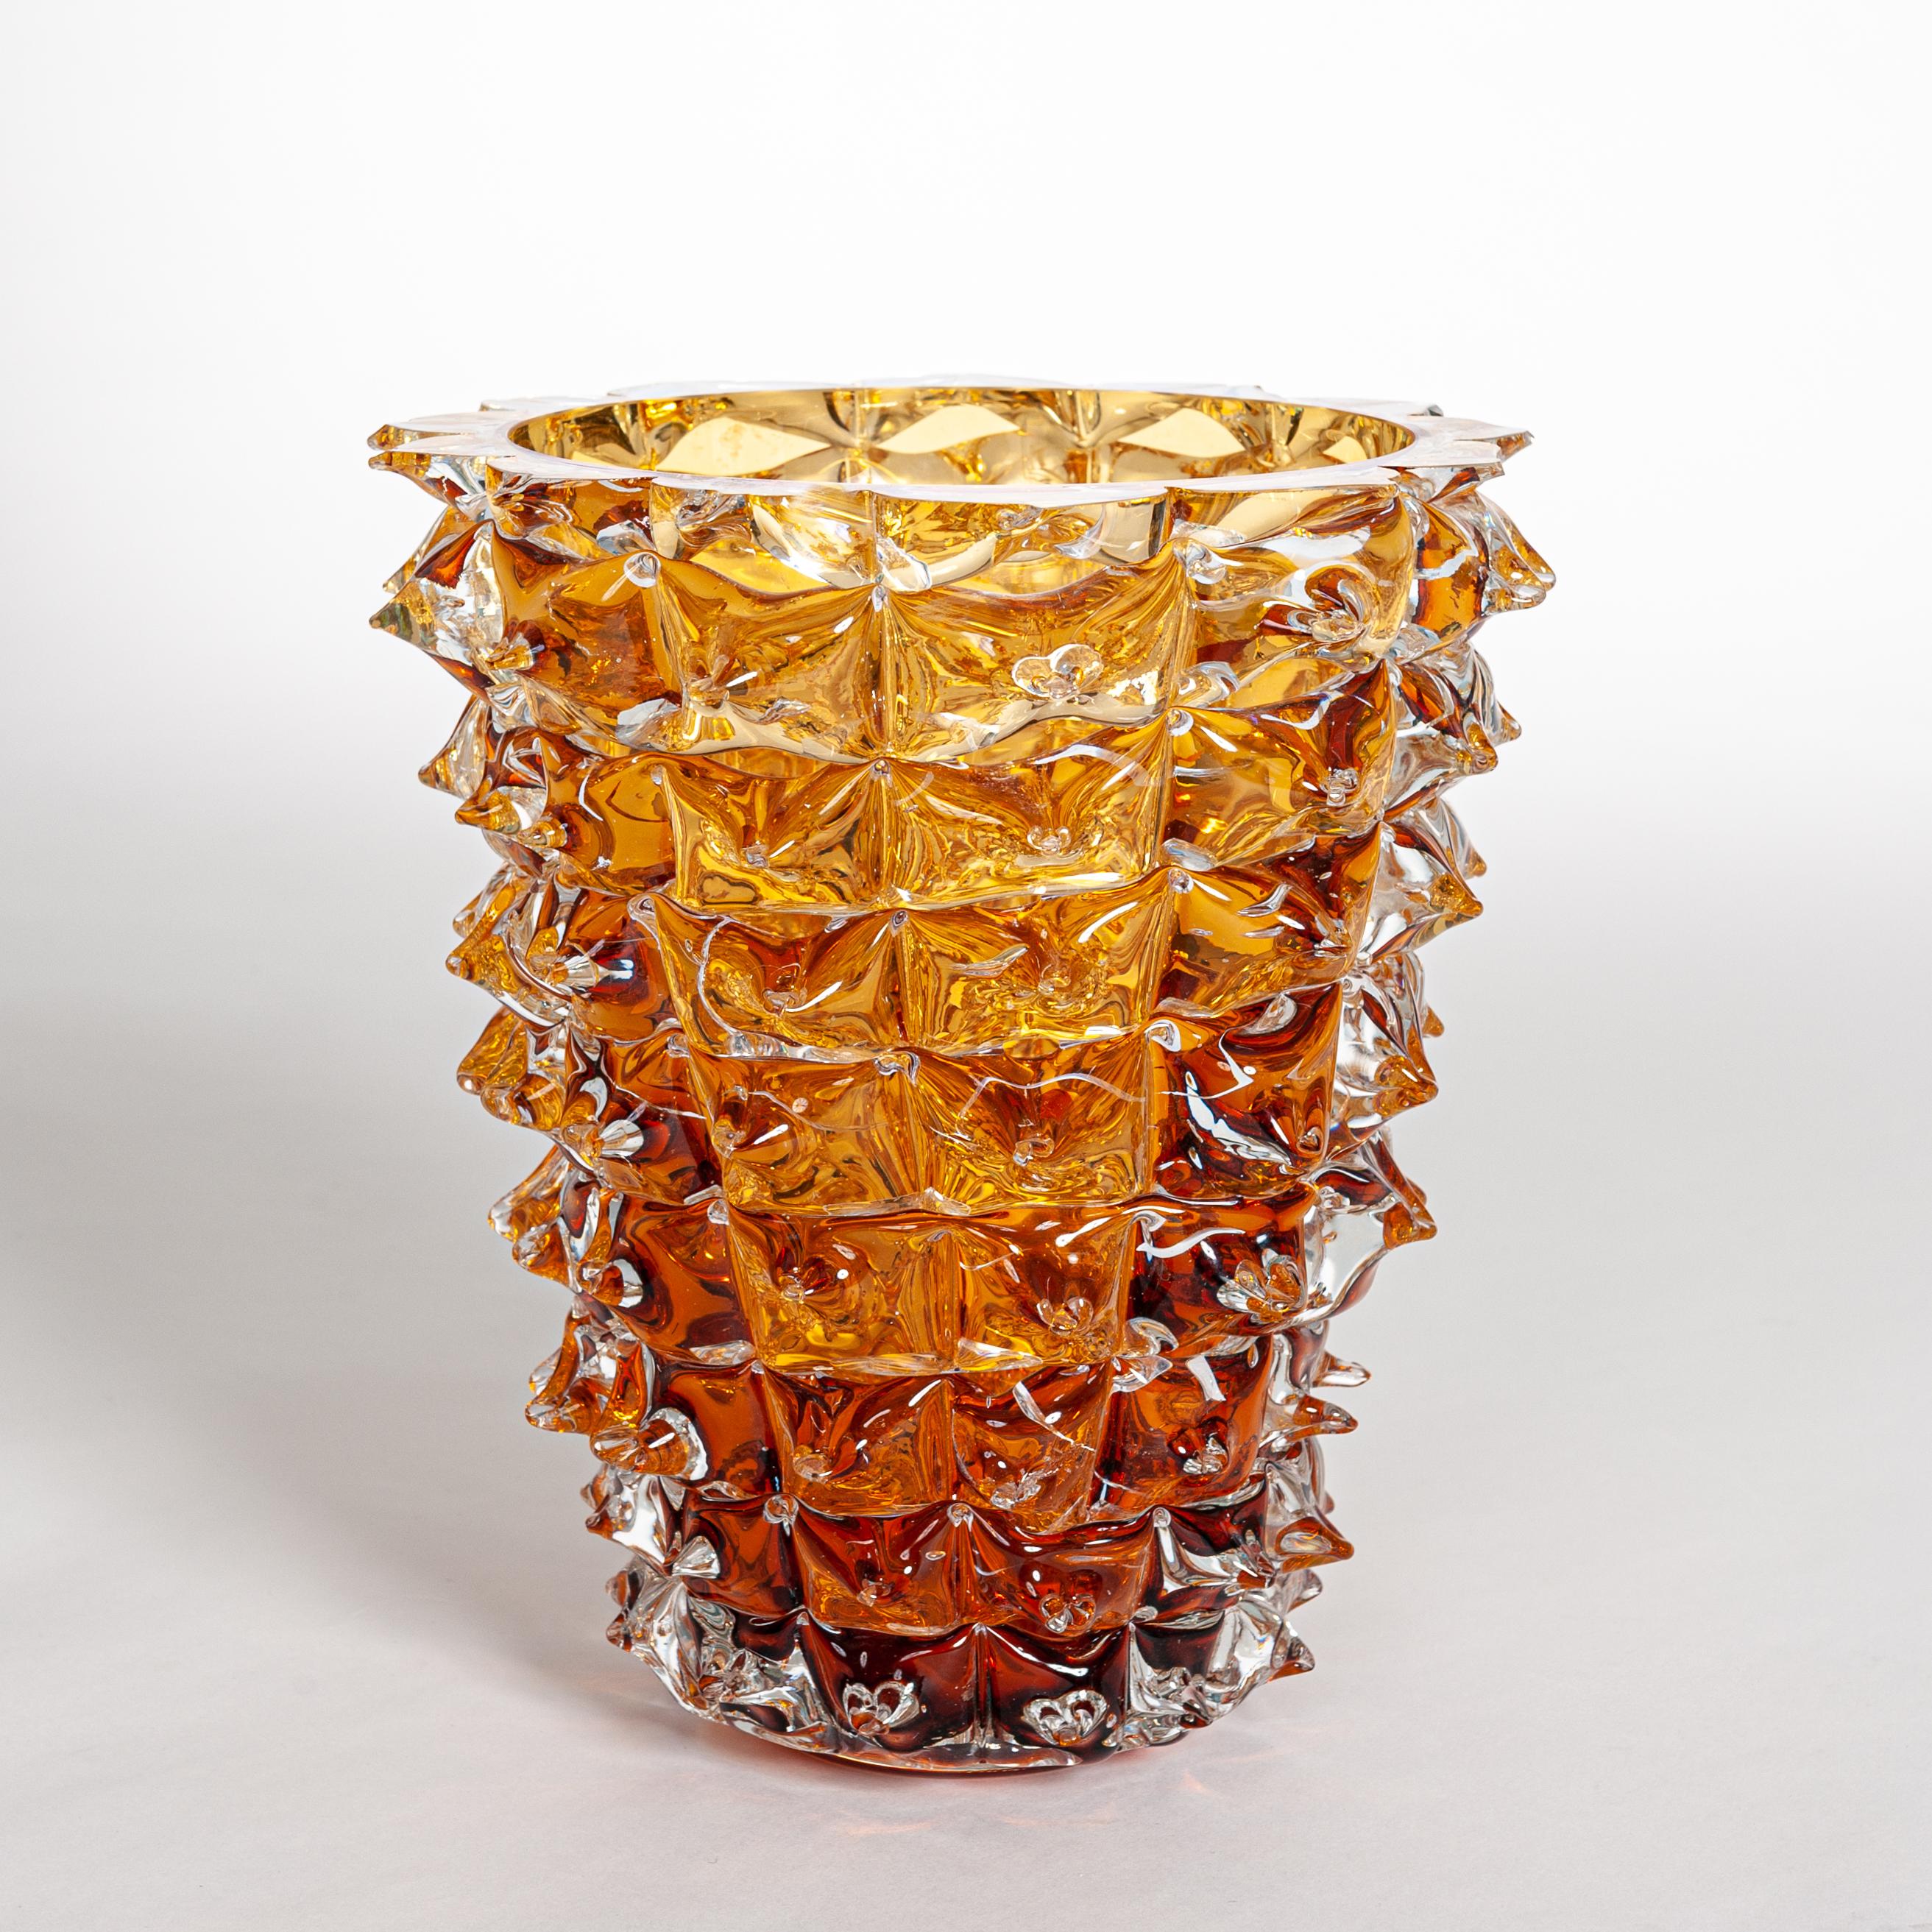 A spectacular pair of Venetian vases, imposing size in clear and amber blown Murano glass,
hand decorated with the technique rostrato: spikes of glass individually pulled in relief.
Thick walled casing glass produces a lot of iridescent